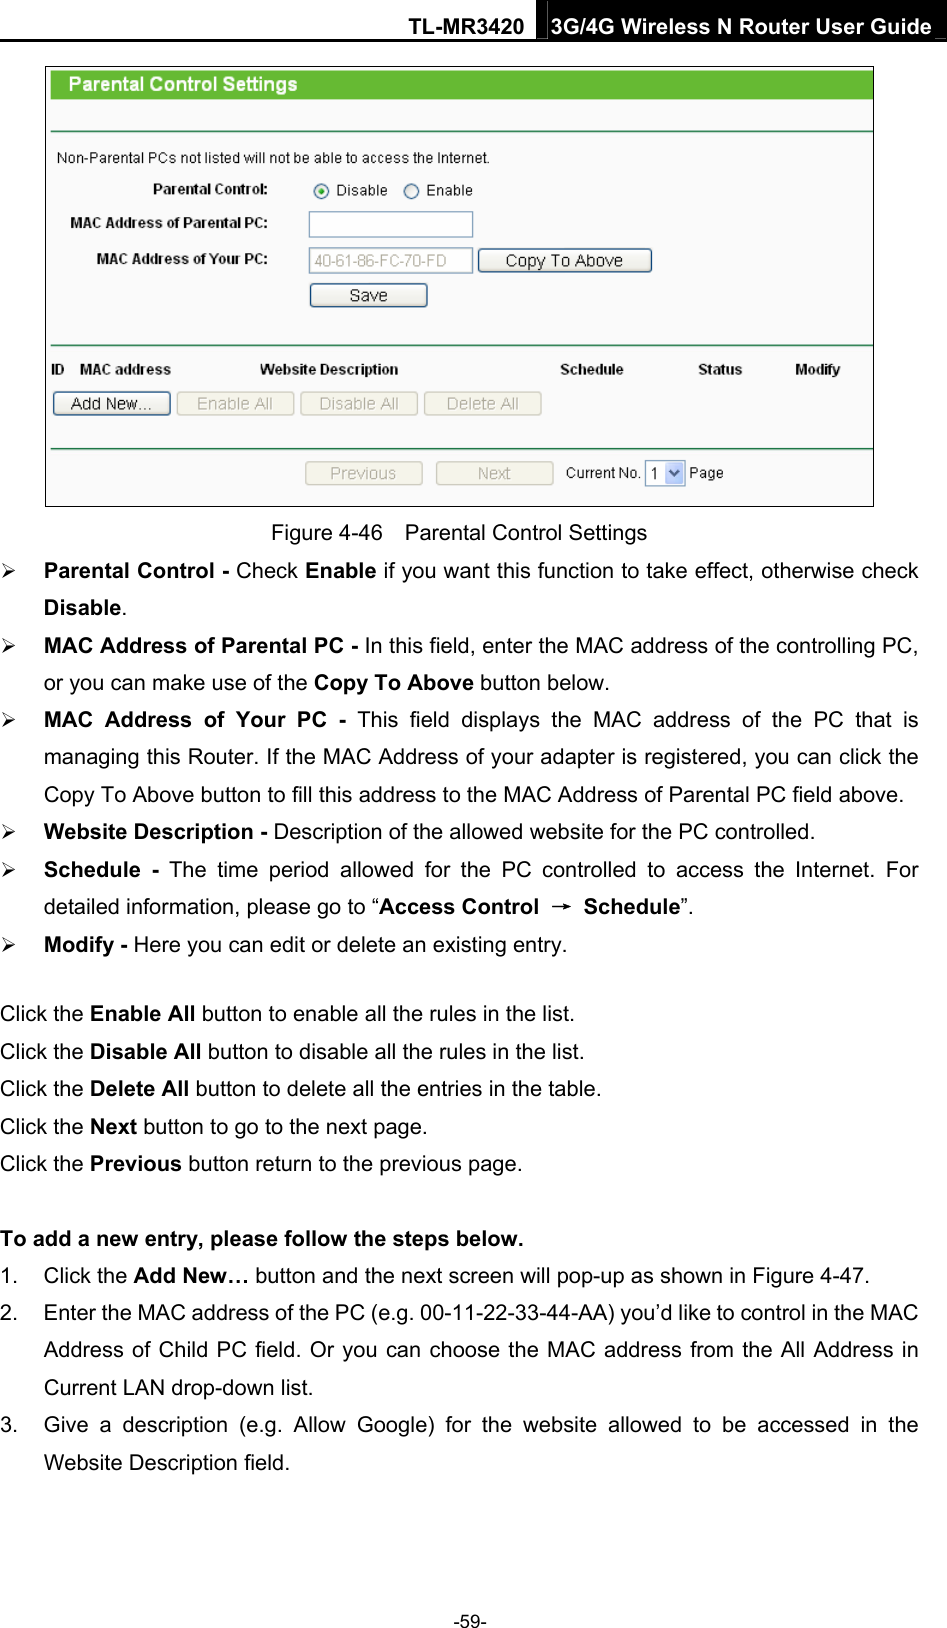 TL-MR3420 3G/4G Wireless N Router User Guide  Figure 4-46    Parental Control Settings  Parental Control - Check Enable if you want this function to take effect, otherwise check Disable.   MAC Address of Parental PC - In this field, enter the MAC address of the controlling PC, or you can make use of the Copy To Above button below.    MAC Address of Your PC - This field displays the MAC address of the PC that is managing this Router. If the MAC Address of your adapter is registered, you can click the Copy To Above button to fill this address to the MAC Address of Parental PC field above.    Website Description - Description of the allowed website for the PC controlled.    Schedule - The time period allowed for the PC controlled to access the Internet. For detailed information, please go to “Access Control  → Schedule”.   Modify - Here you can edit or delete an existing entry.   Click the Enable All button to enable all the rules in the list. Click the Disable All button to disable all the rules in the list. Click the Delete All button to delete all the entries in the table. Click the Next button to go to the next page. Click the Previous button return to the previous page.  To add a new entry, please follow the steps below. 1. Click the Add New… button and the next screen will pop-up as shown in Figure 4-47. 2.  Enter the MAC address of the PC (e.g. 00-11-22-33-44-AA) you’d like to control in the MAC Address of Child PC field. Or you can choose the MAC address from the All Address in Current LAN drop-down list. 3.  Give a description (e.g. Allow Google) for the website allowed to be accessed in the Website Description field. -59- 